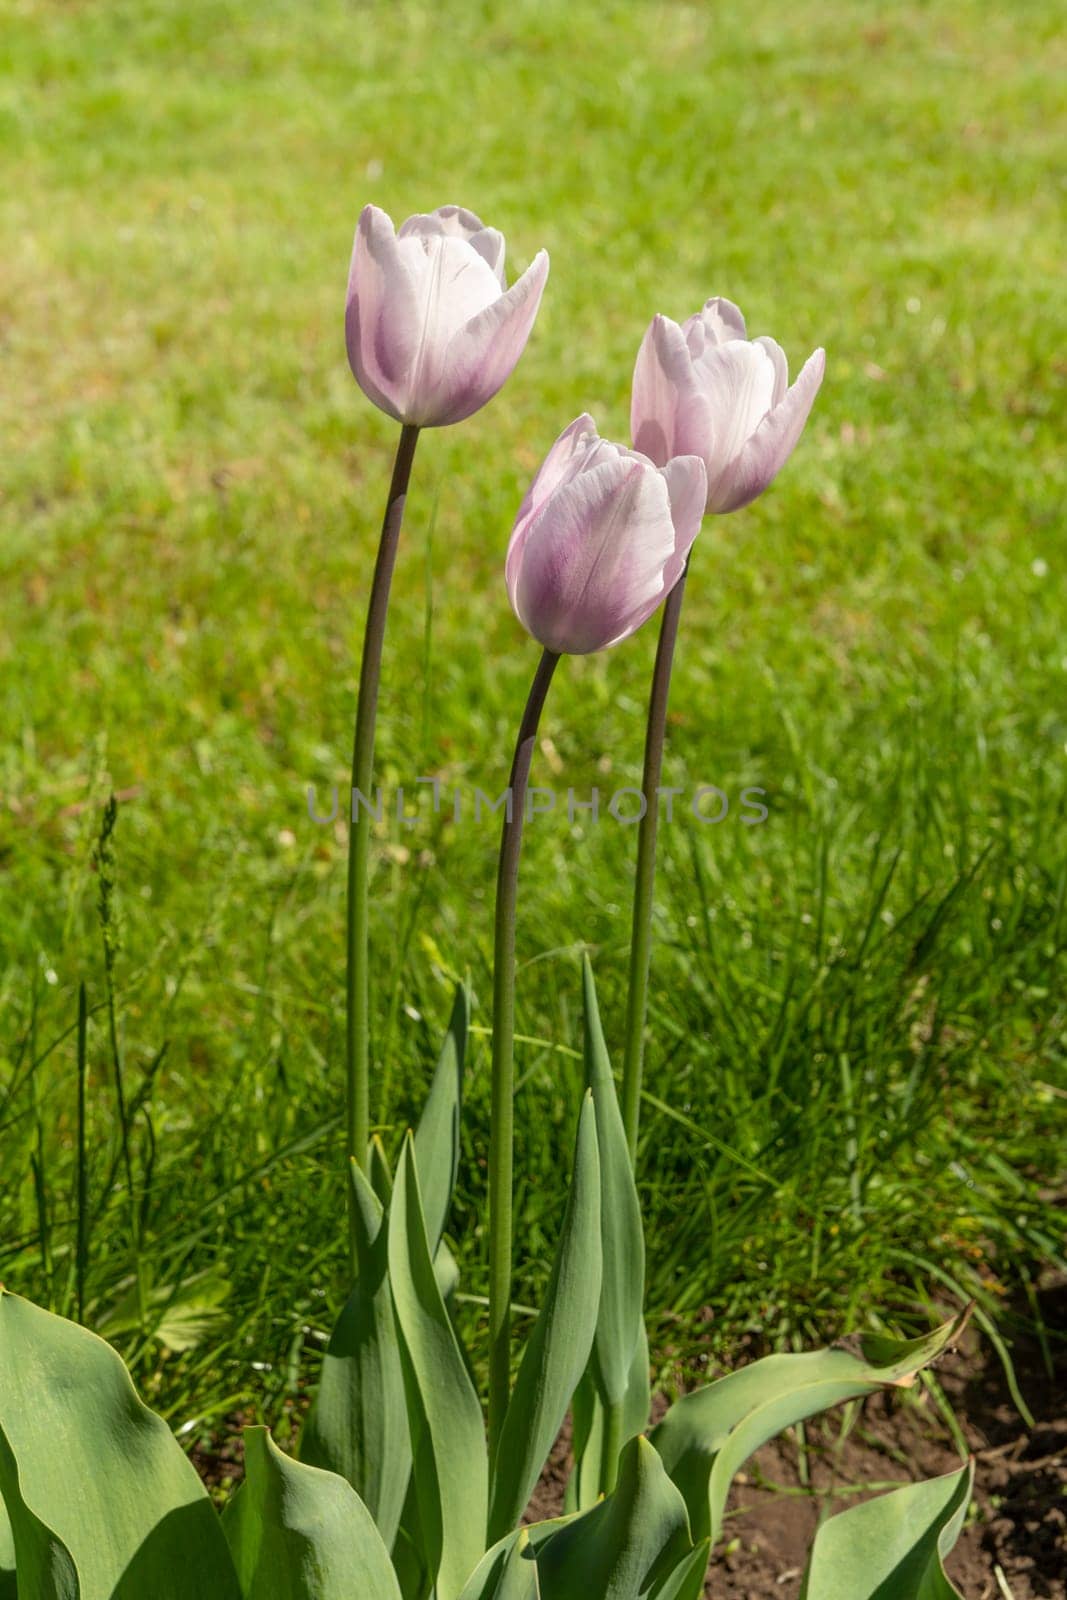 Violet tulips growing on the garden bed with green grass on the background. Shallow depth of field.